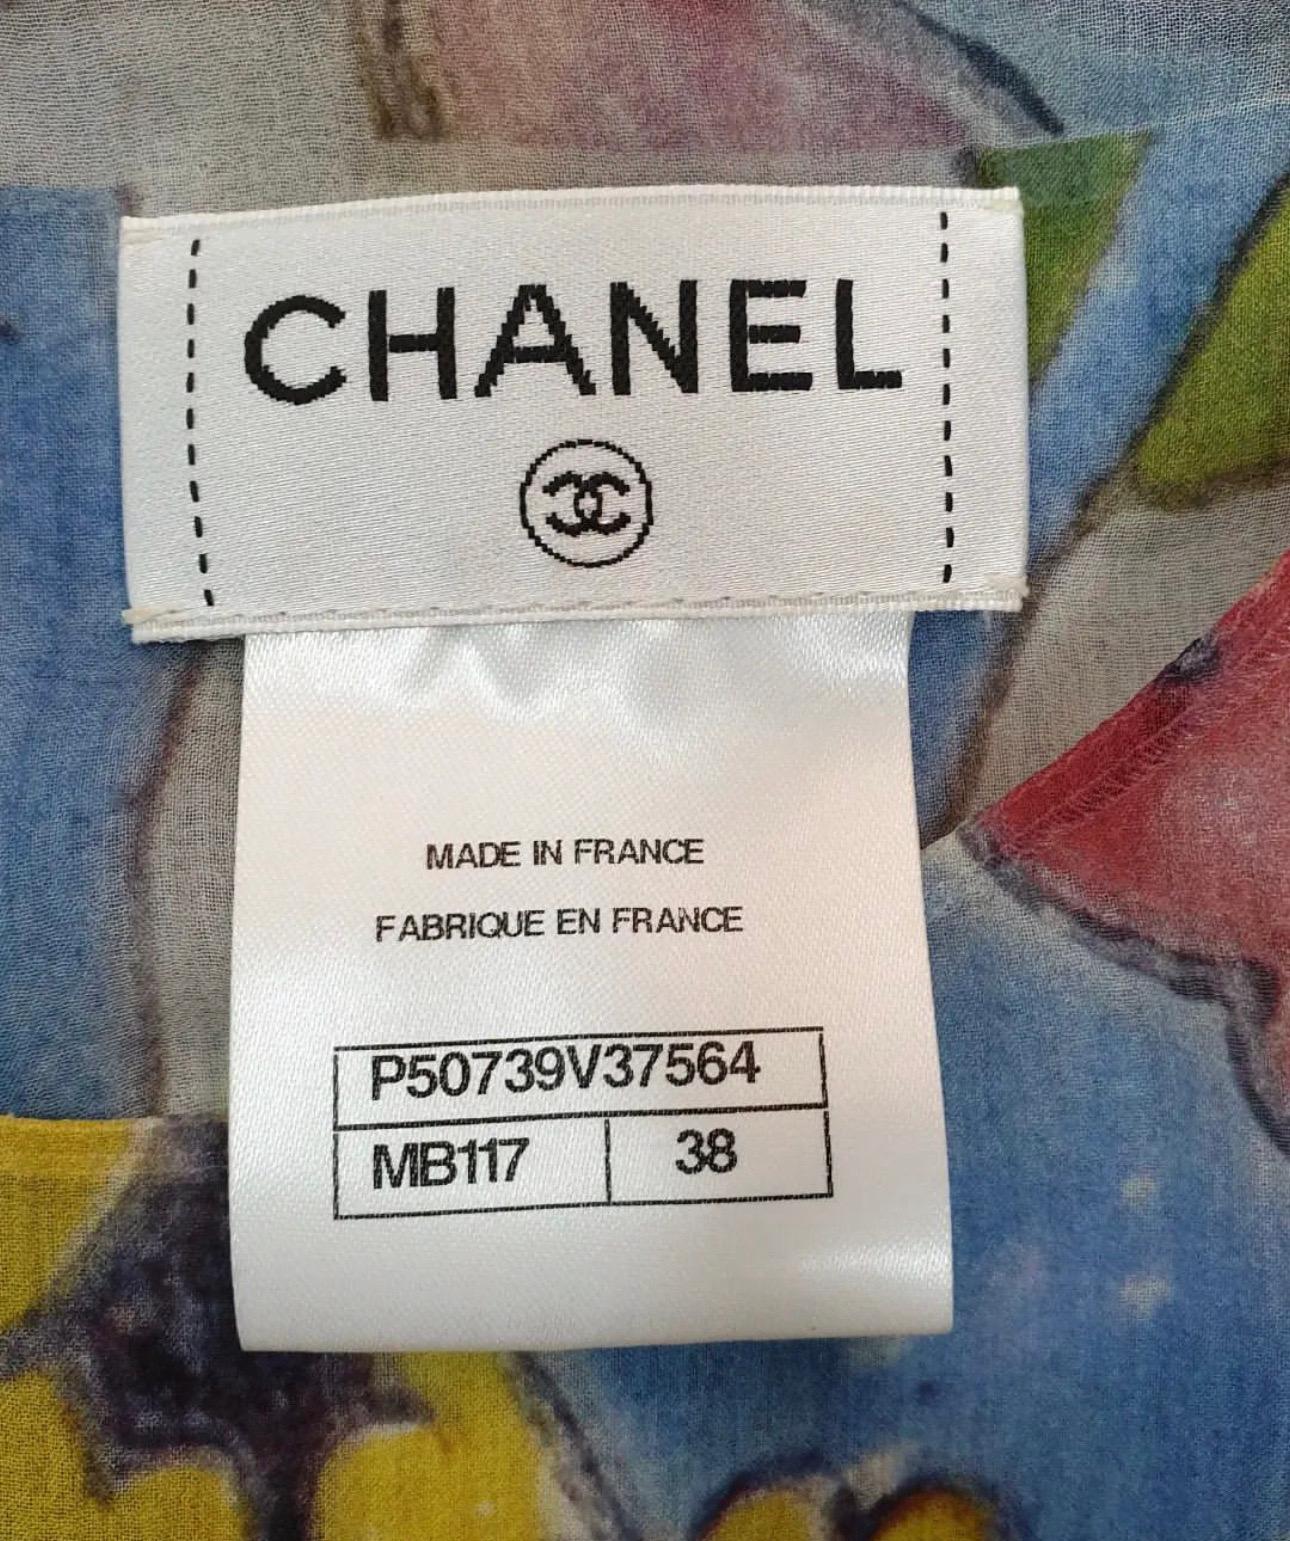 Chanel Cruise 2014-2015 Dubai Floral Silk Top Blouse In Excellent Condition For Sale In Krakow, PL